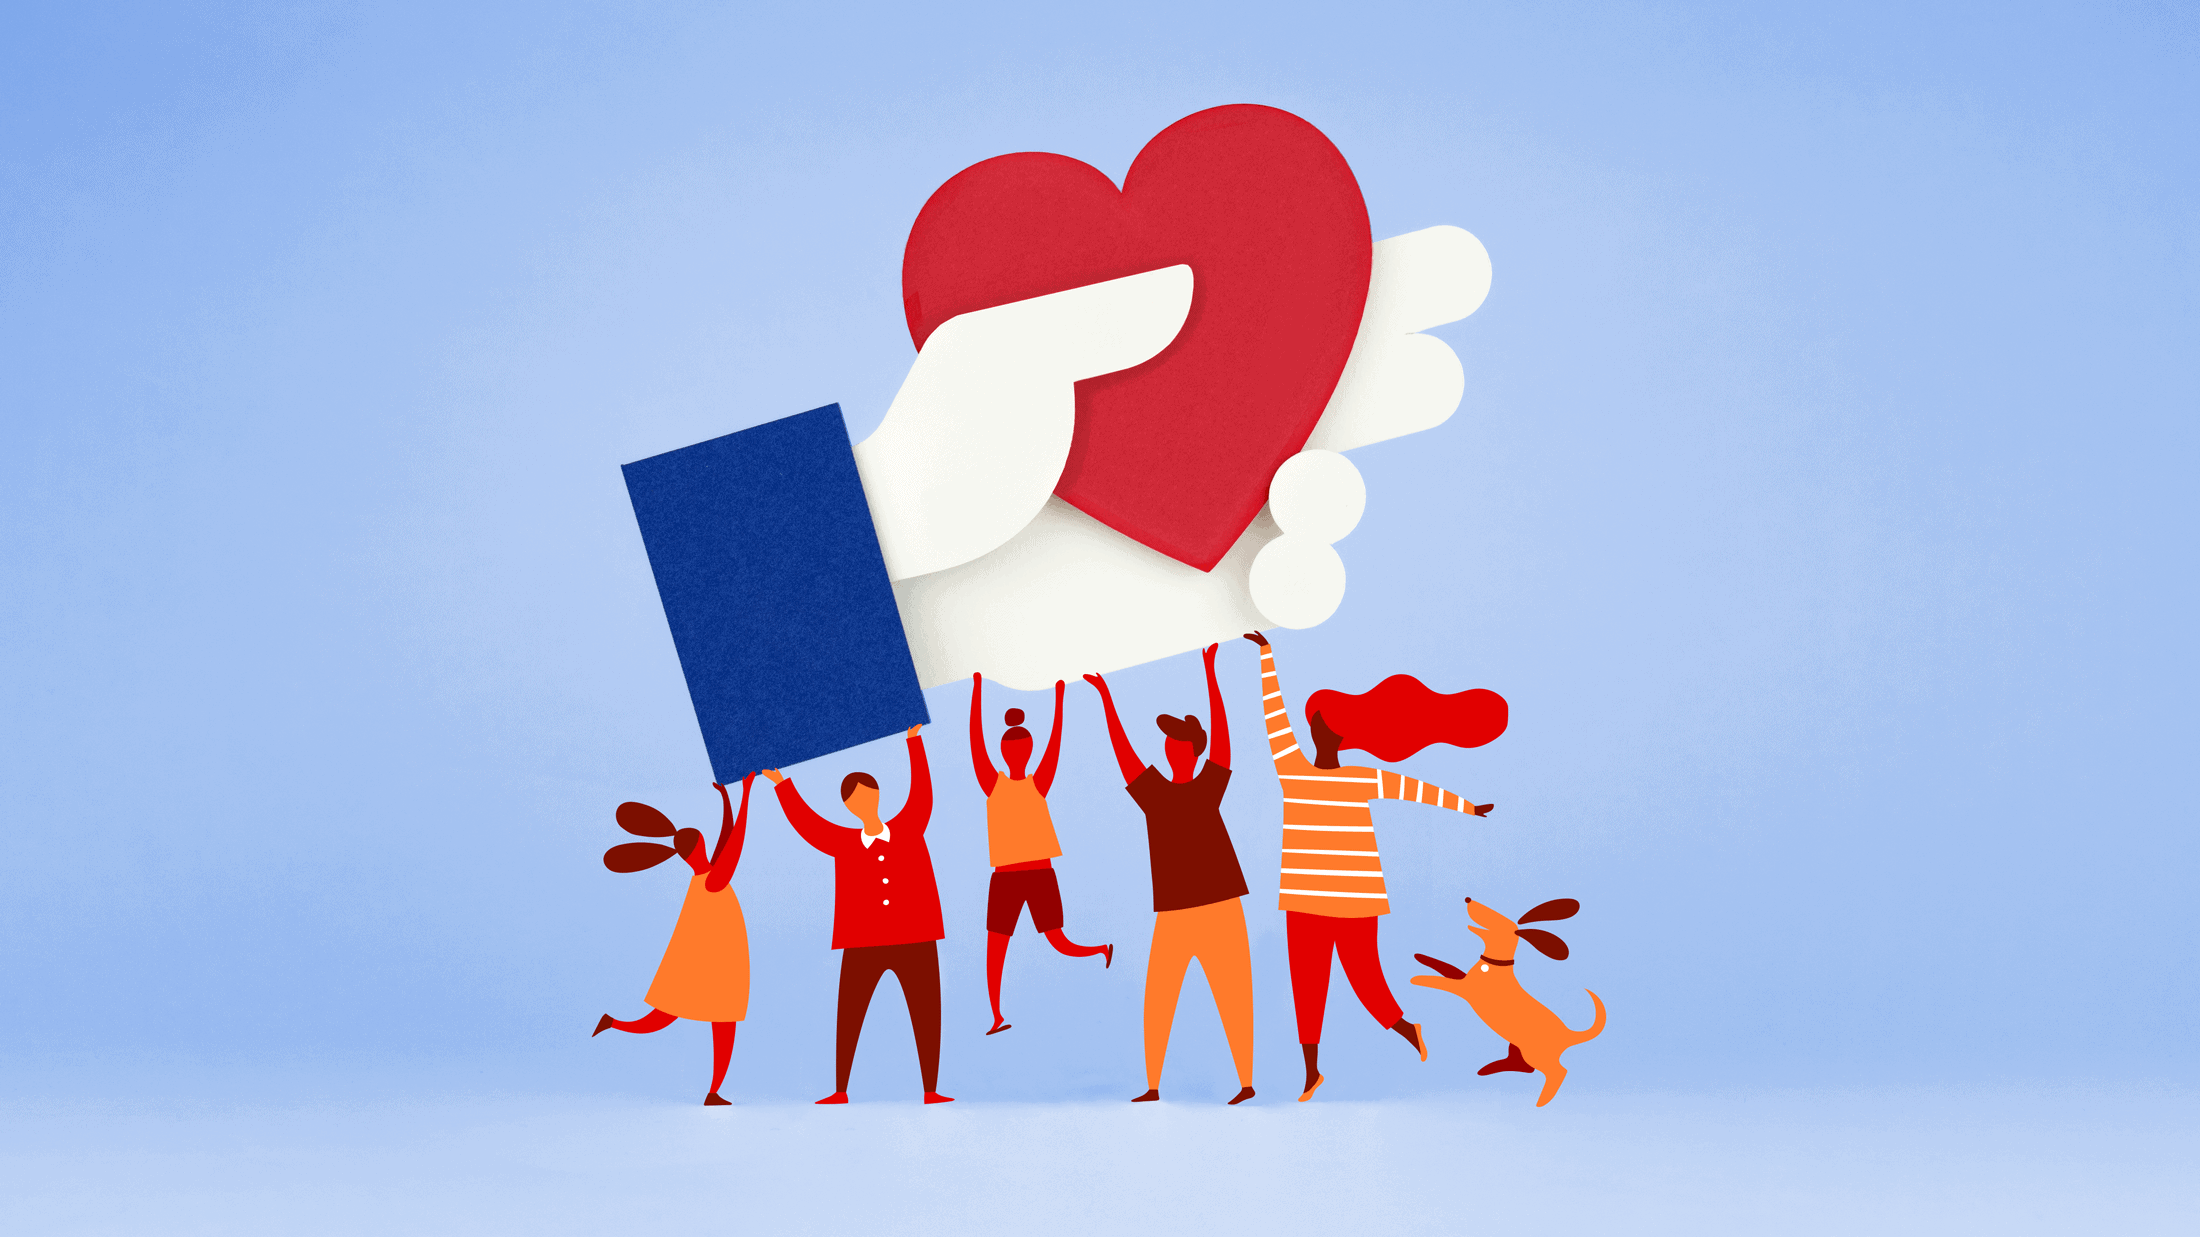 Illustration of a group of people holding a Facebook heart